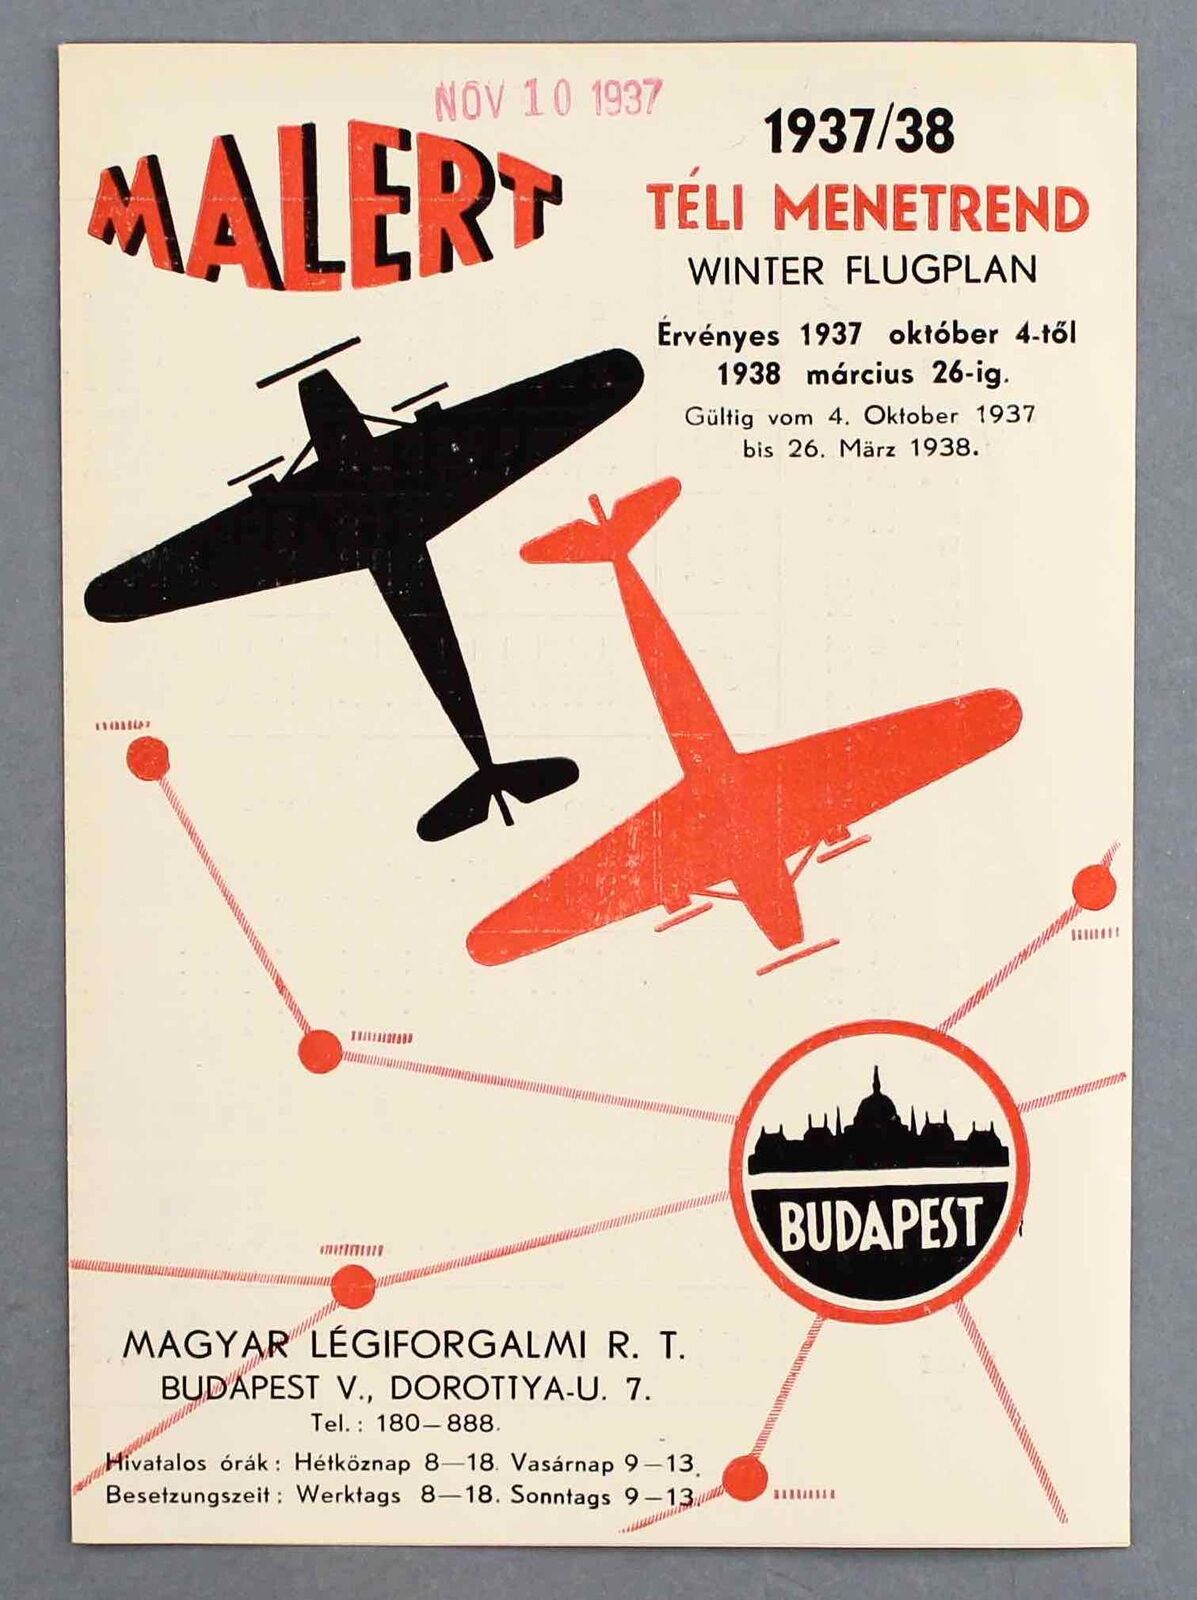 MALERT PRE-WAR AIRLINE TIMETABLE WINTER 1937/38 HUNGARY MALEV